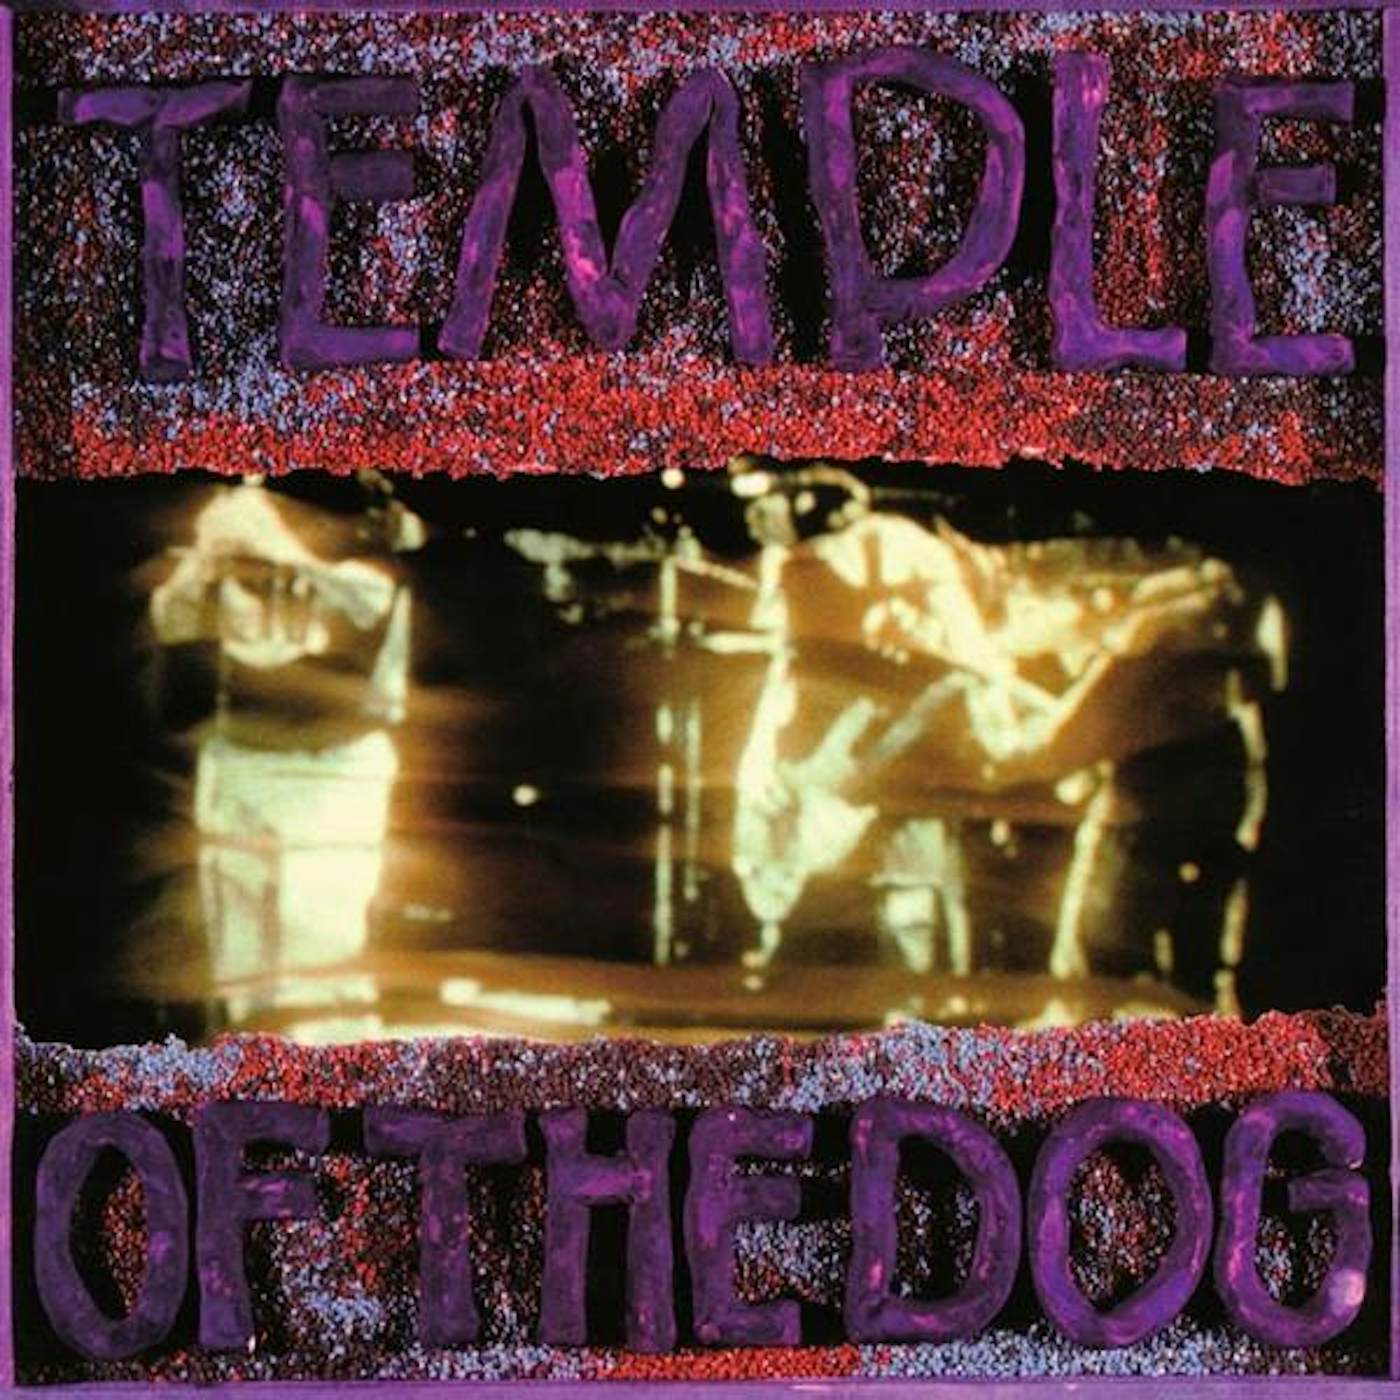 TEMPLE OF THE DOG CD